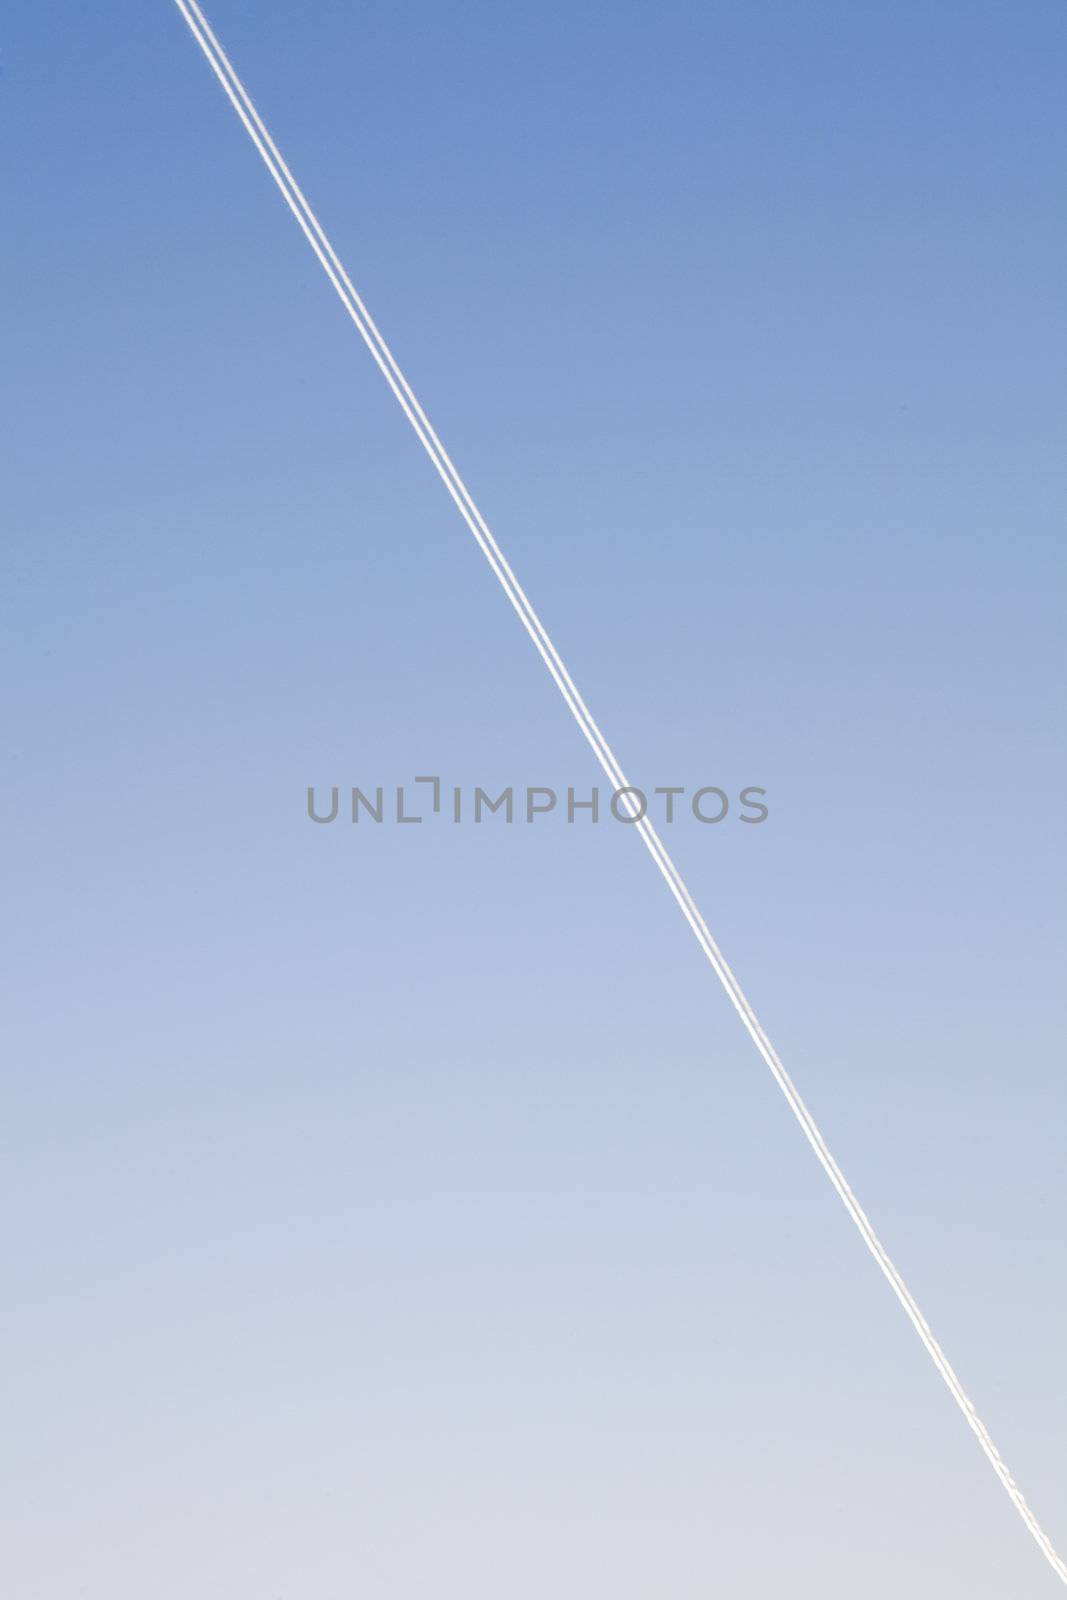 traces of the plane in the sky by jannyjus